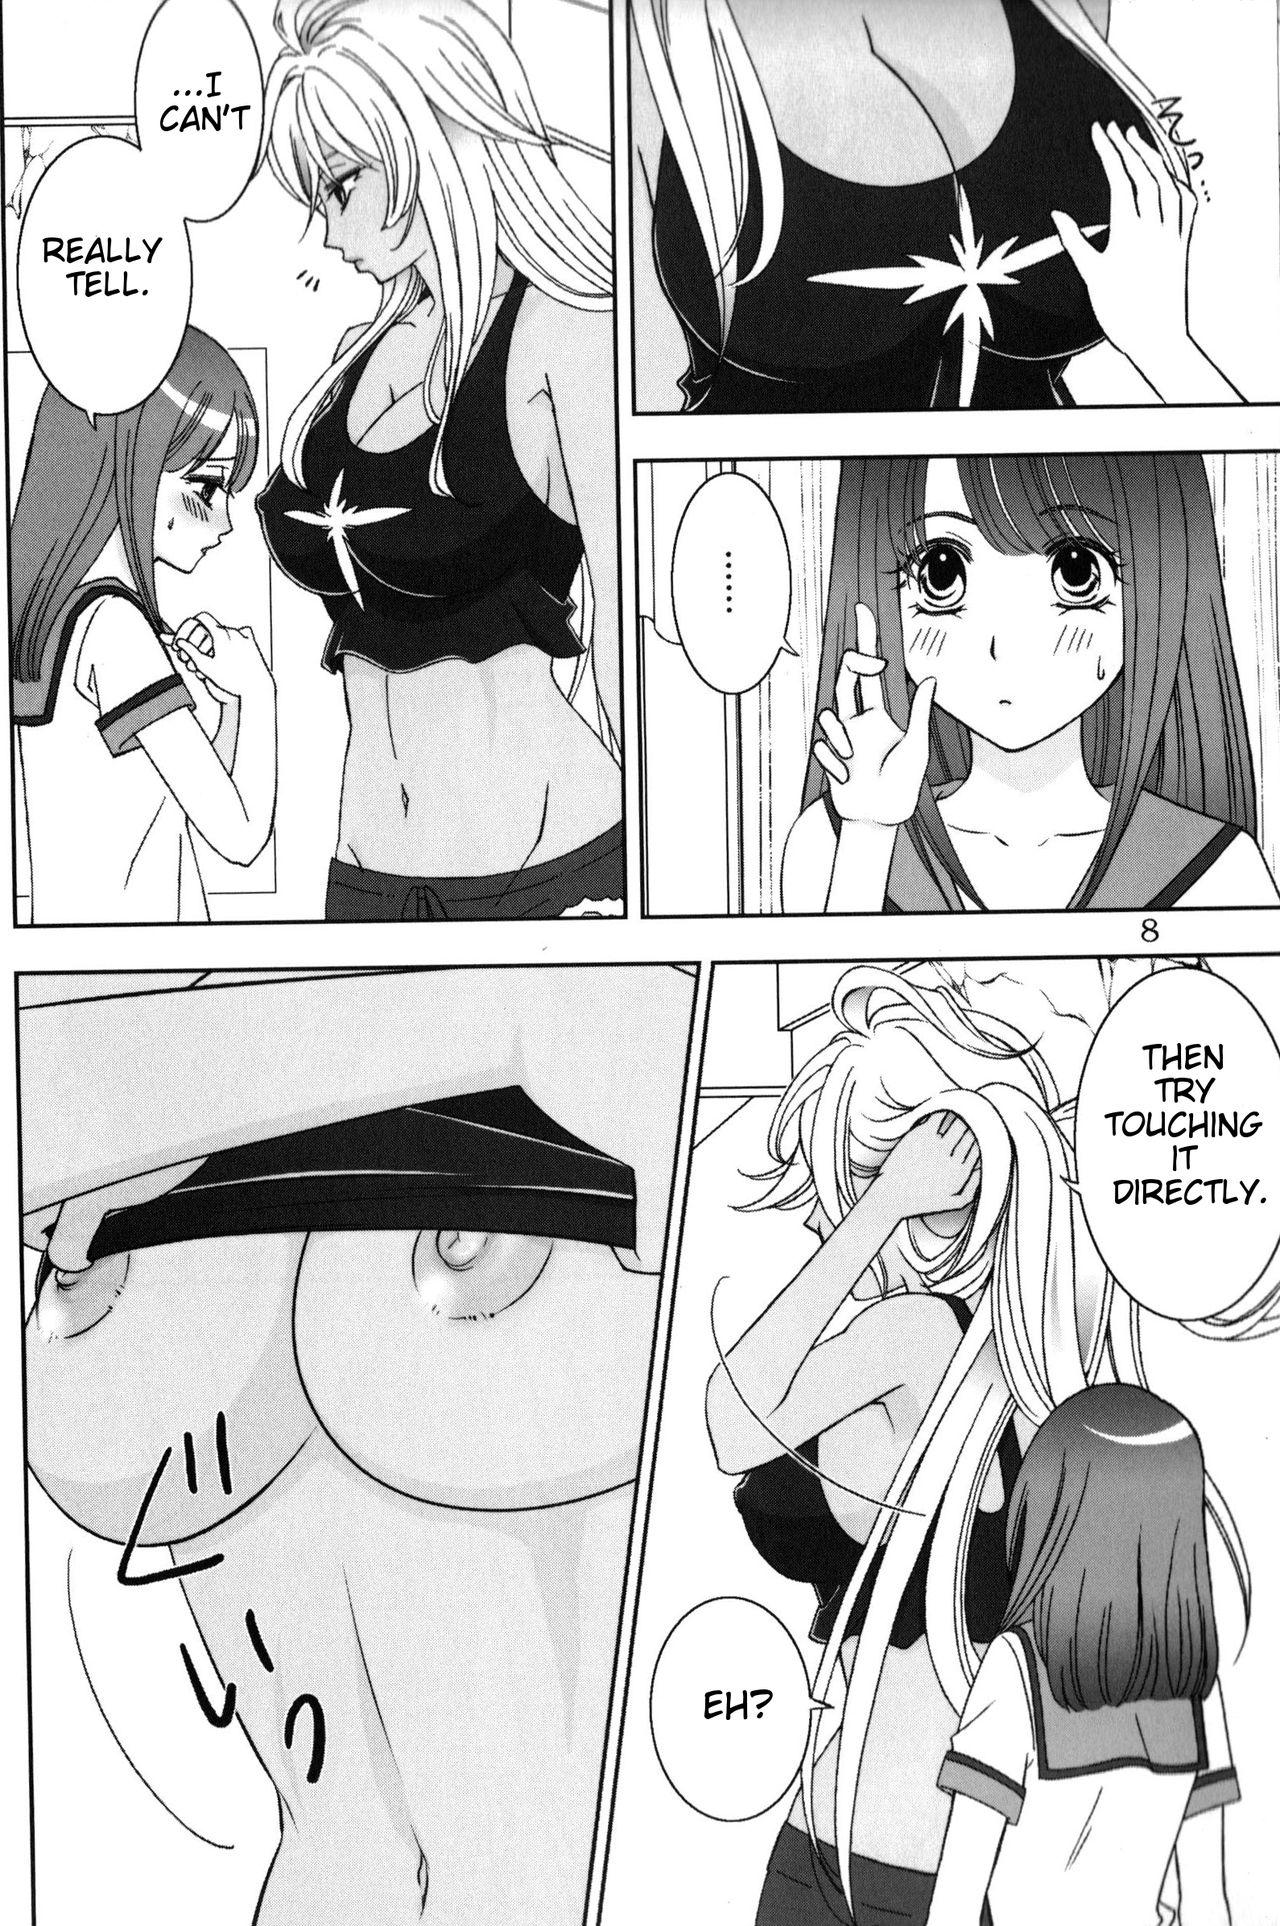 Gloryholes Give it Away - Valkyrie drive Gostosas - Page 7